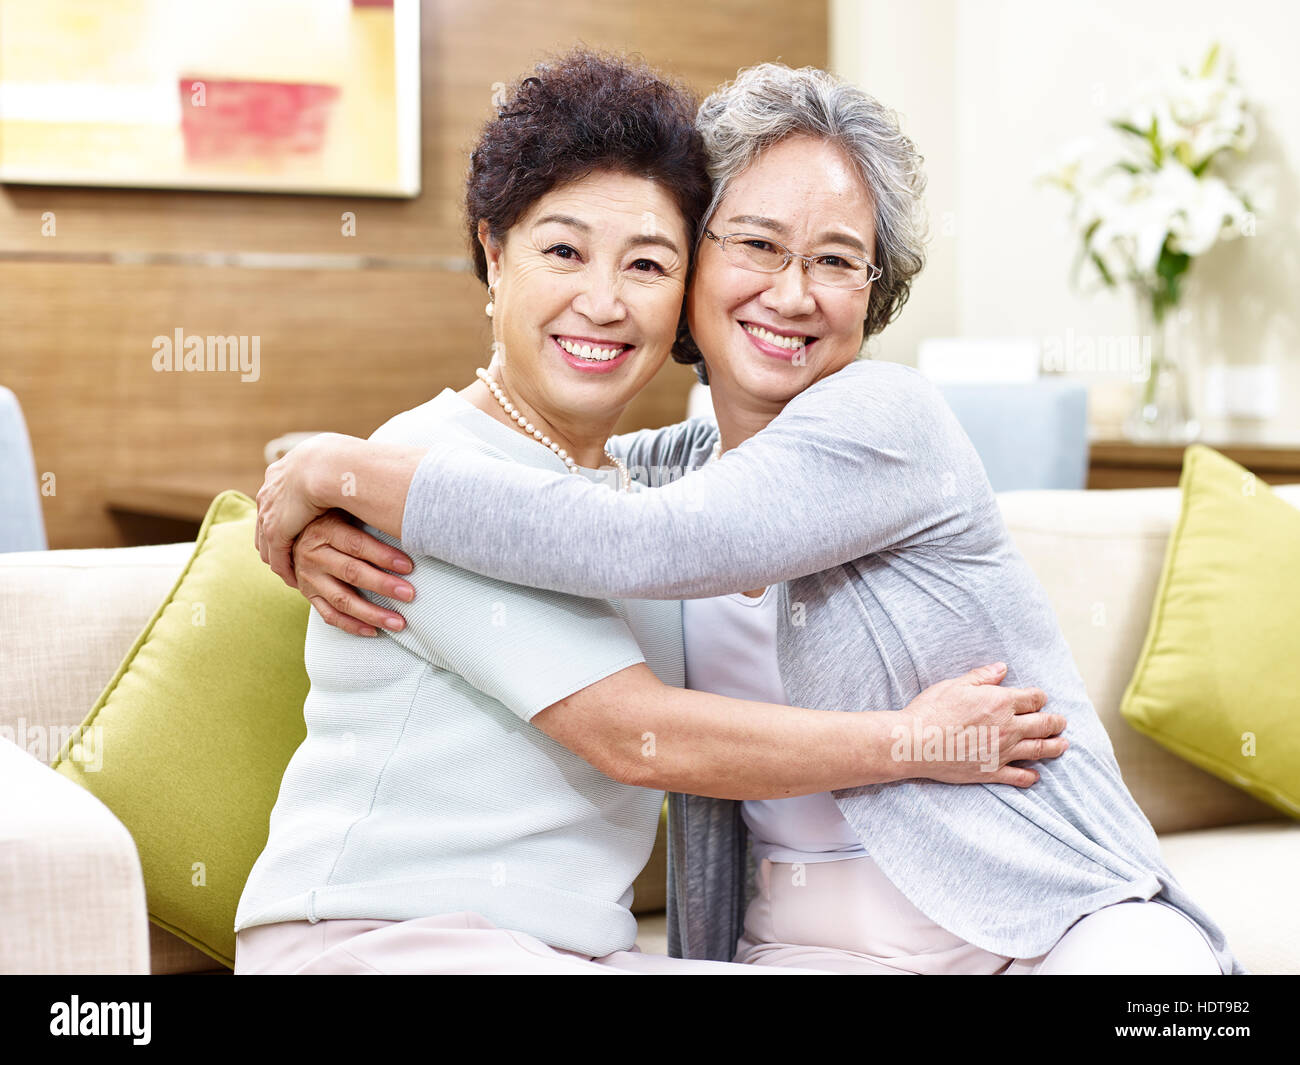 two senior asian women sitting on couch hugging each other, happy and smiling Stock Photo